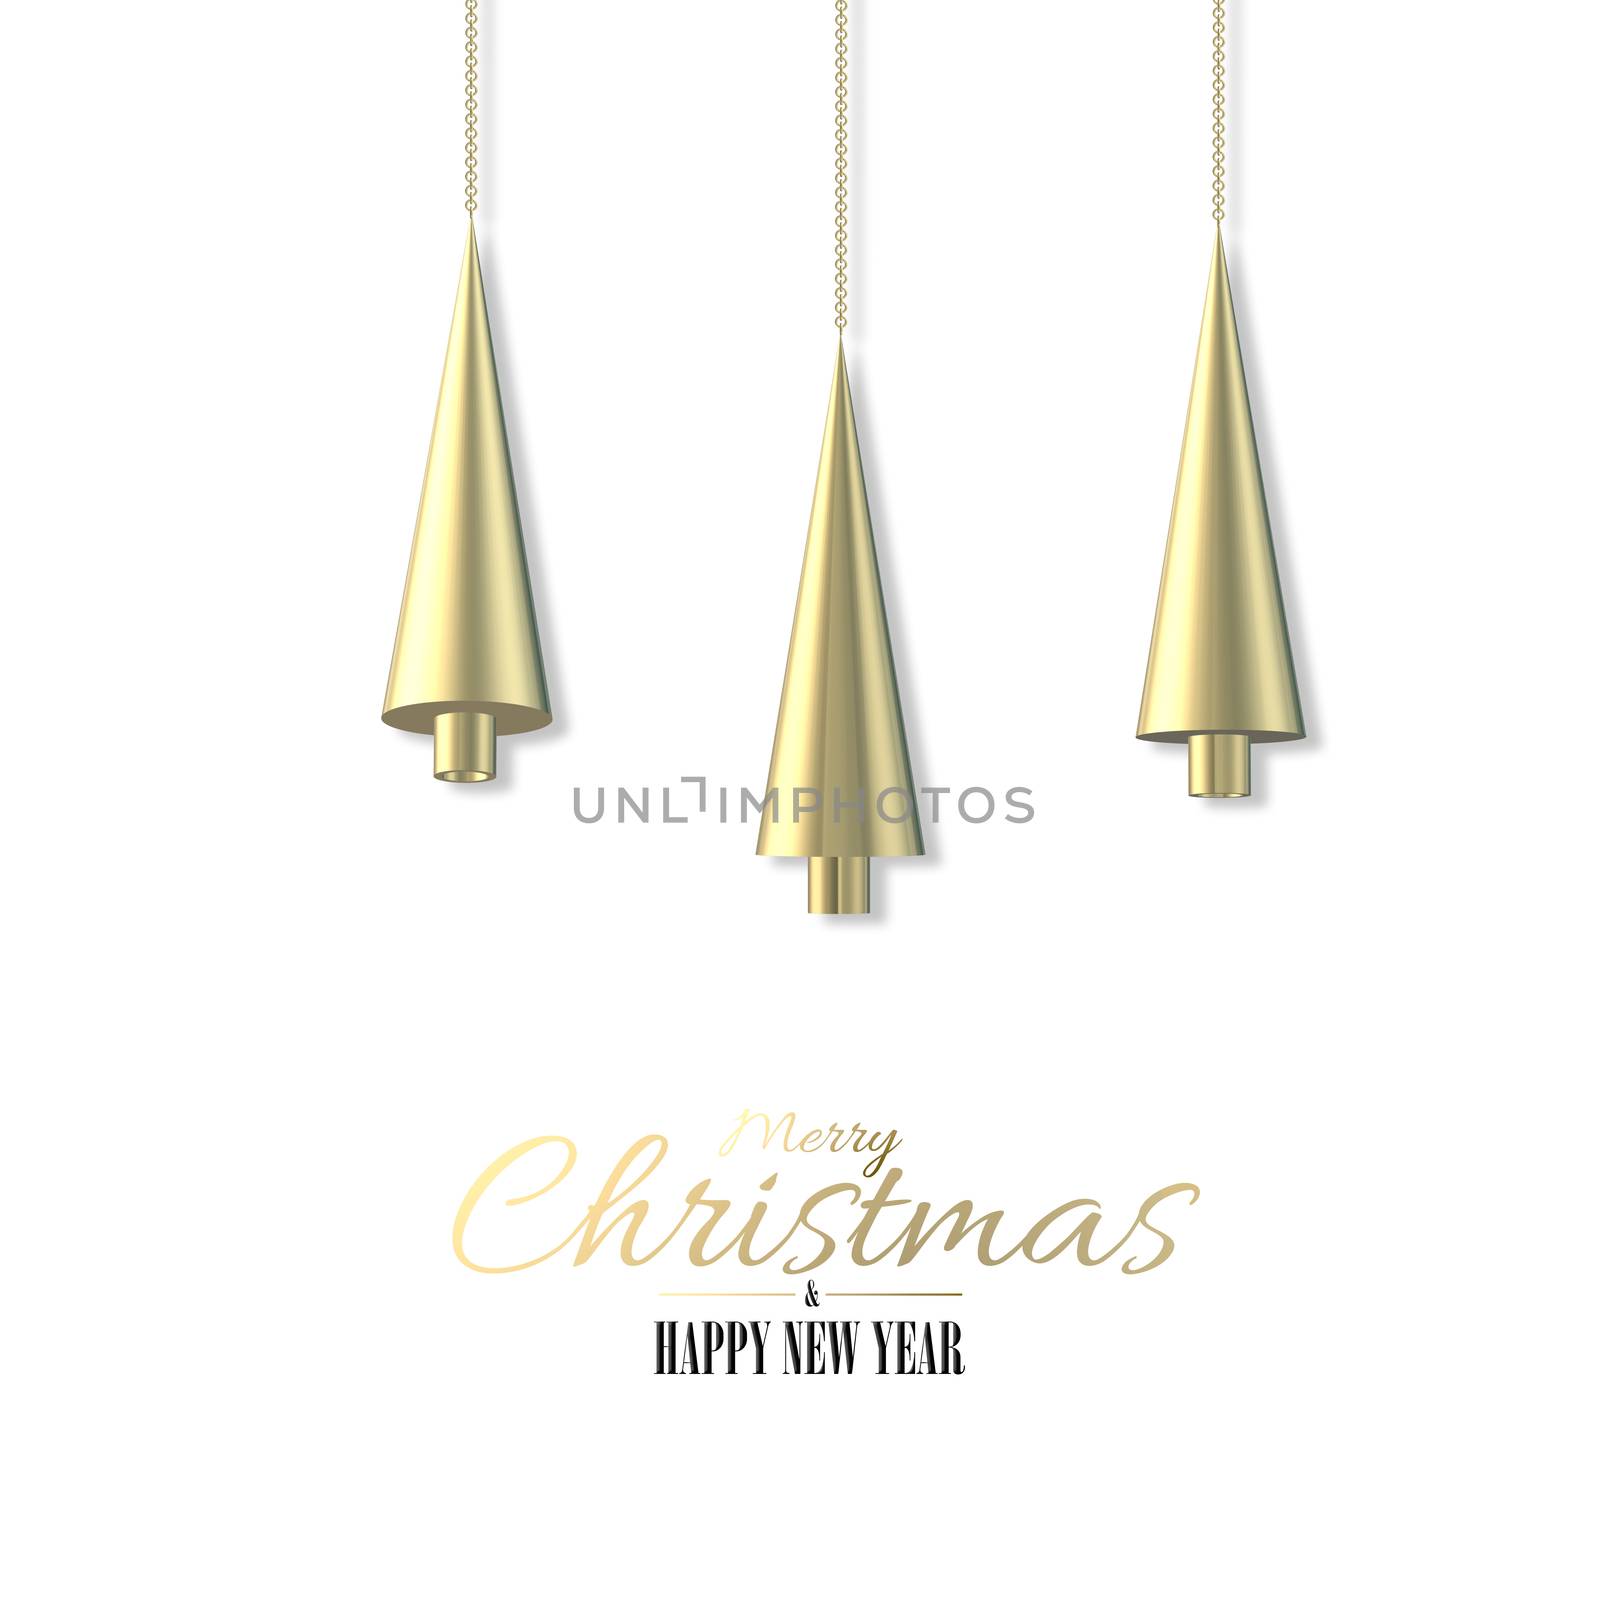 3D abstract Christmas card on white. 3D white hanging Xmas trees on white background. Golden Text Merry Christmas Happy New Year. Holiday Xmas card in 3D illustration